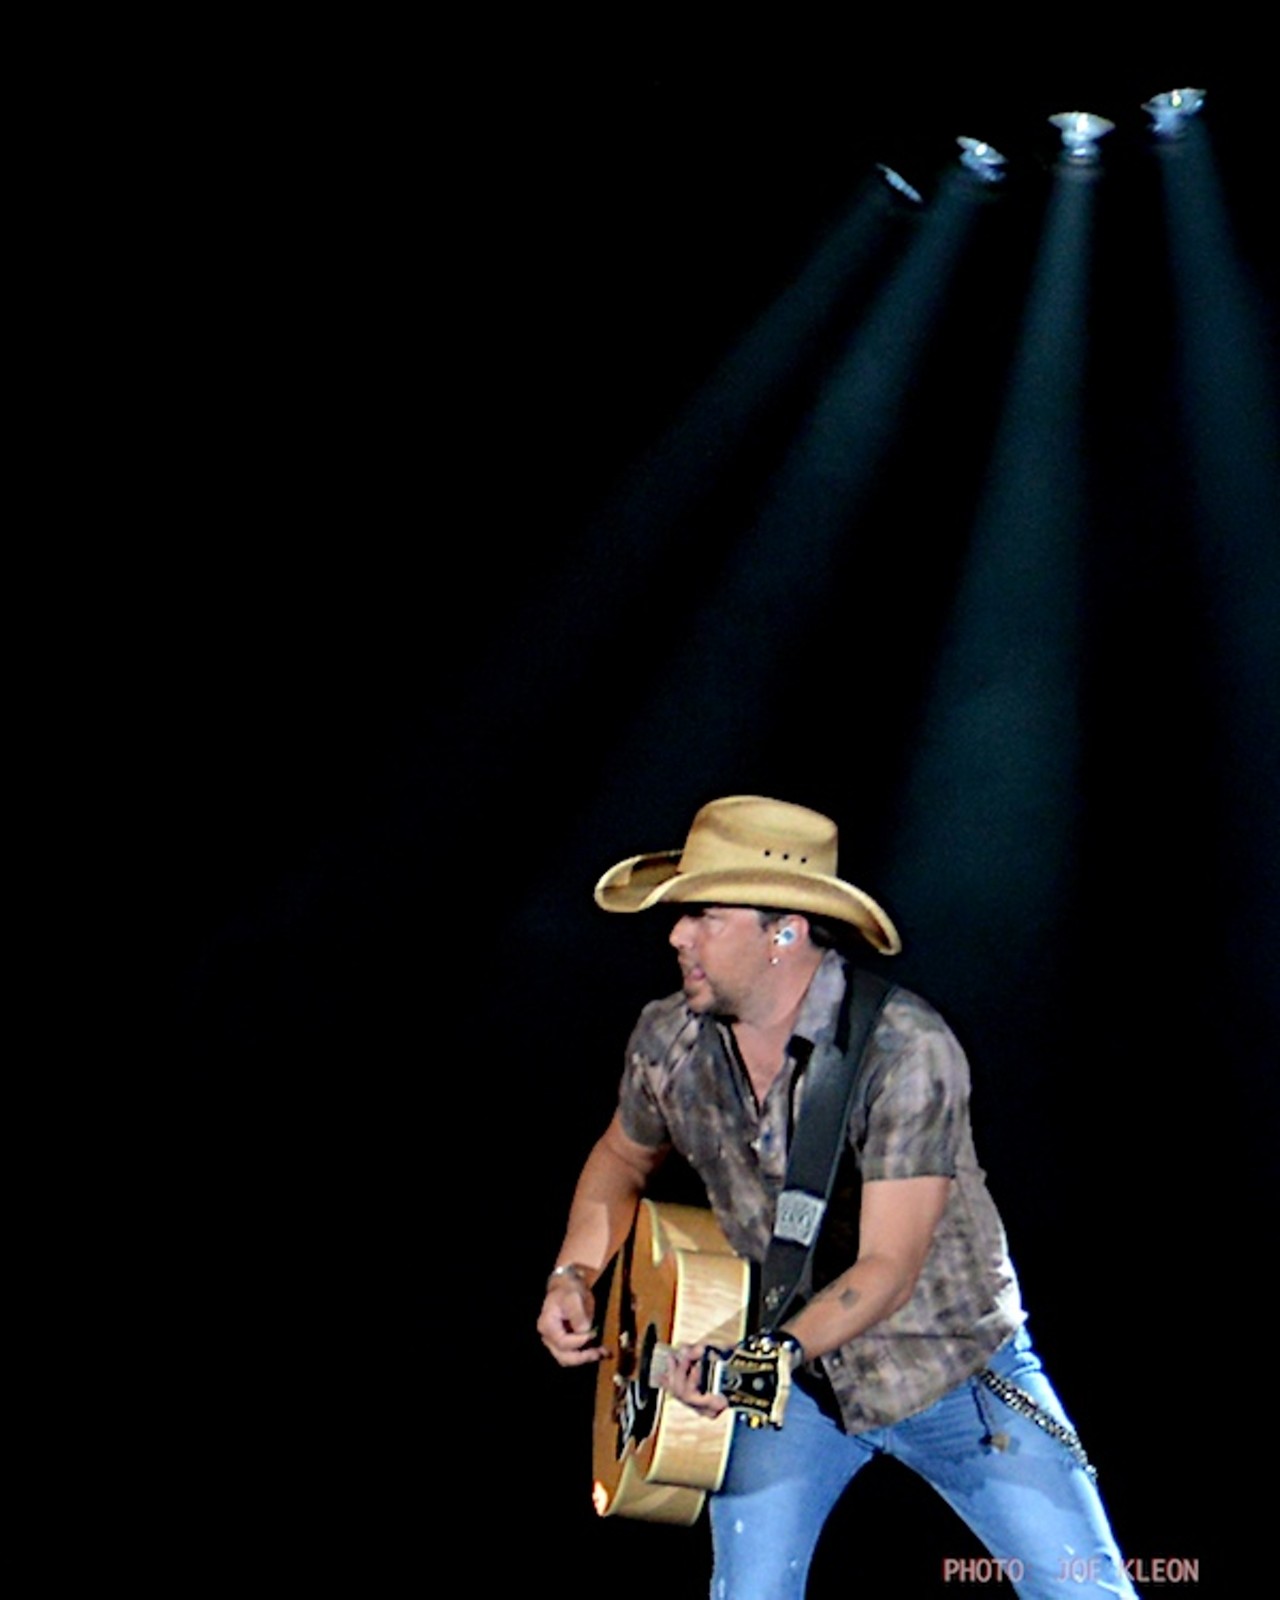 Photos from the Jason Aldean Concert at Progressive Field